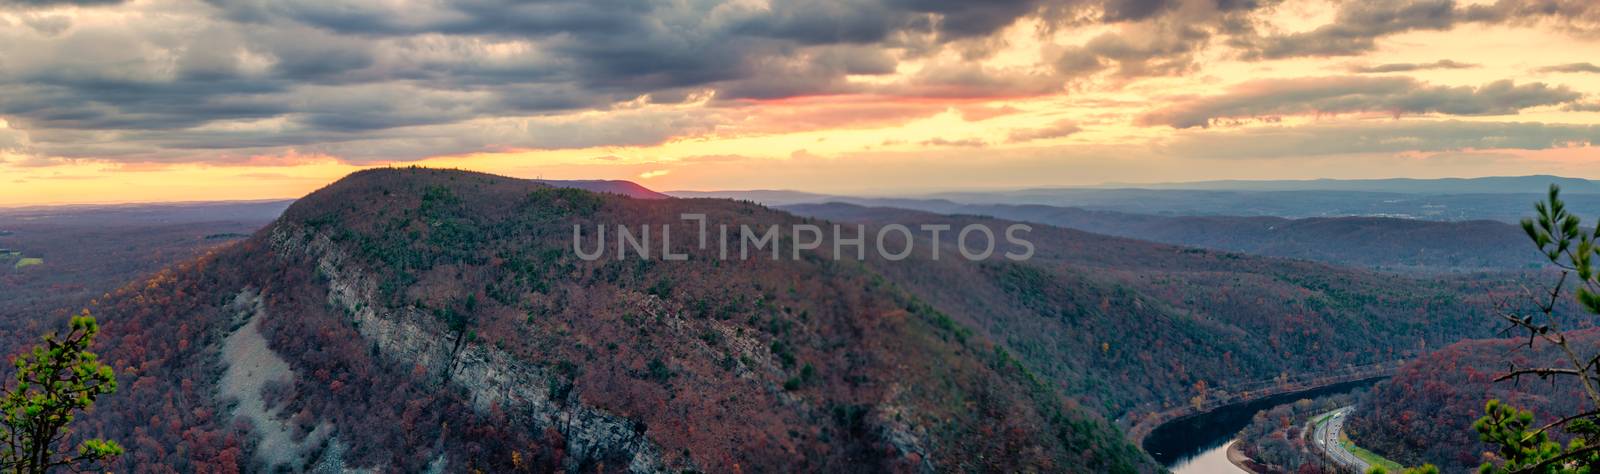 A Panoramic View Of a Dramatic Sunset From Atop Mount Tammany at the Delaware Water Gap